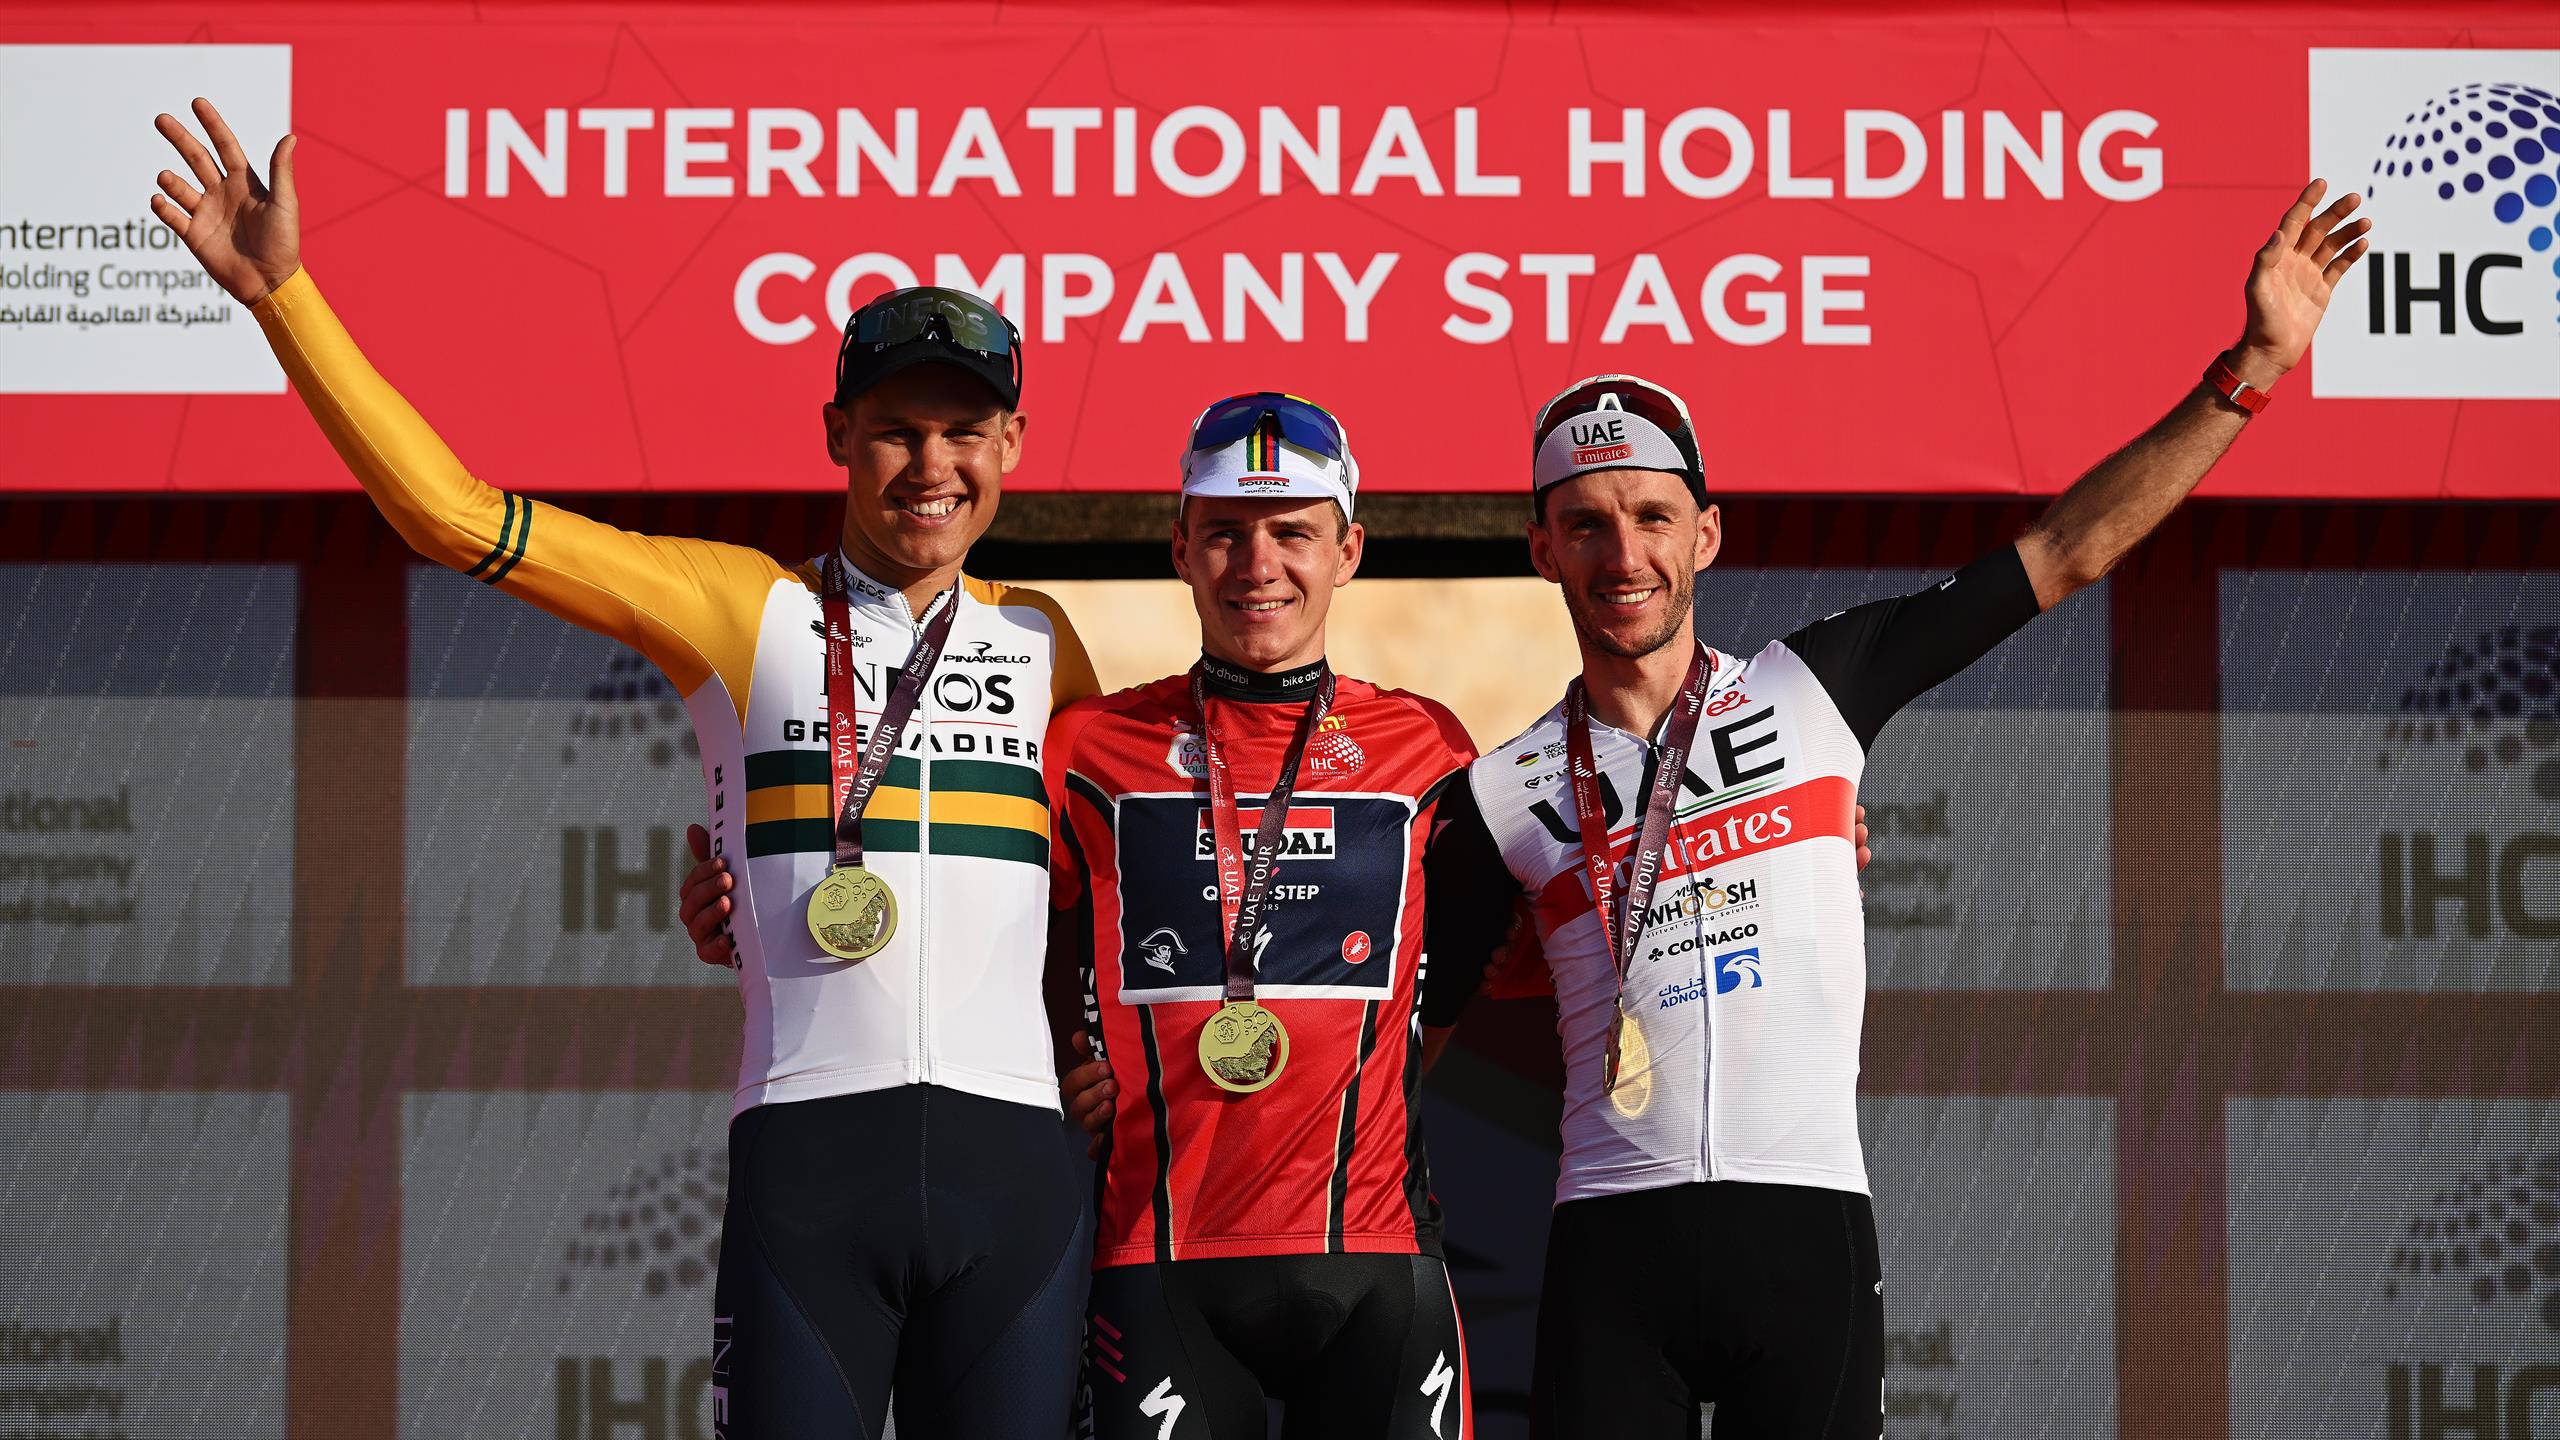 Remco Evenepoel wins overall at UAE Tour Adam Yates takes first on Stage 7